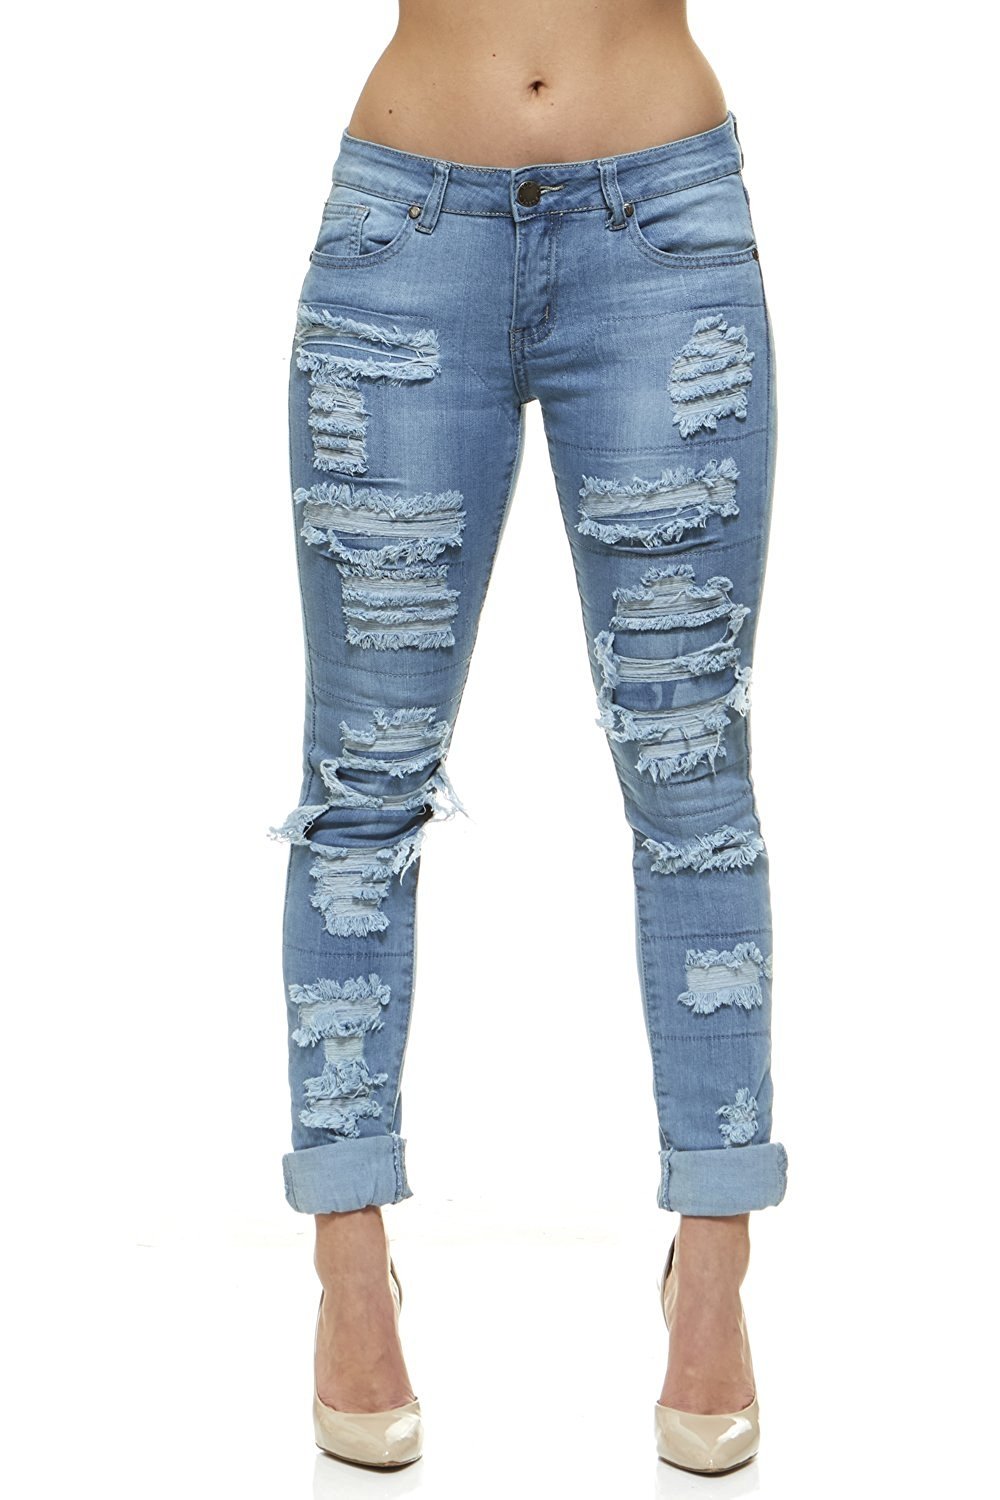 VIP Distressed and Repaired Skinny Stretch Ripped Jeans For Women ...